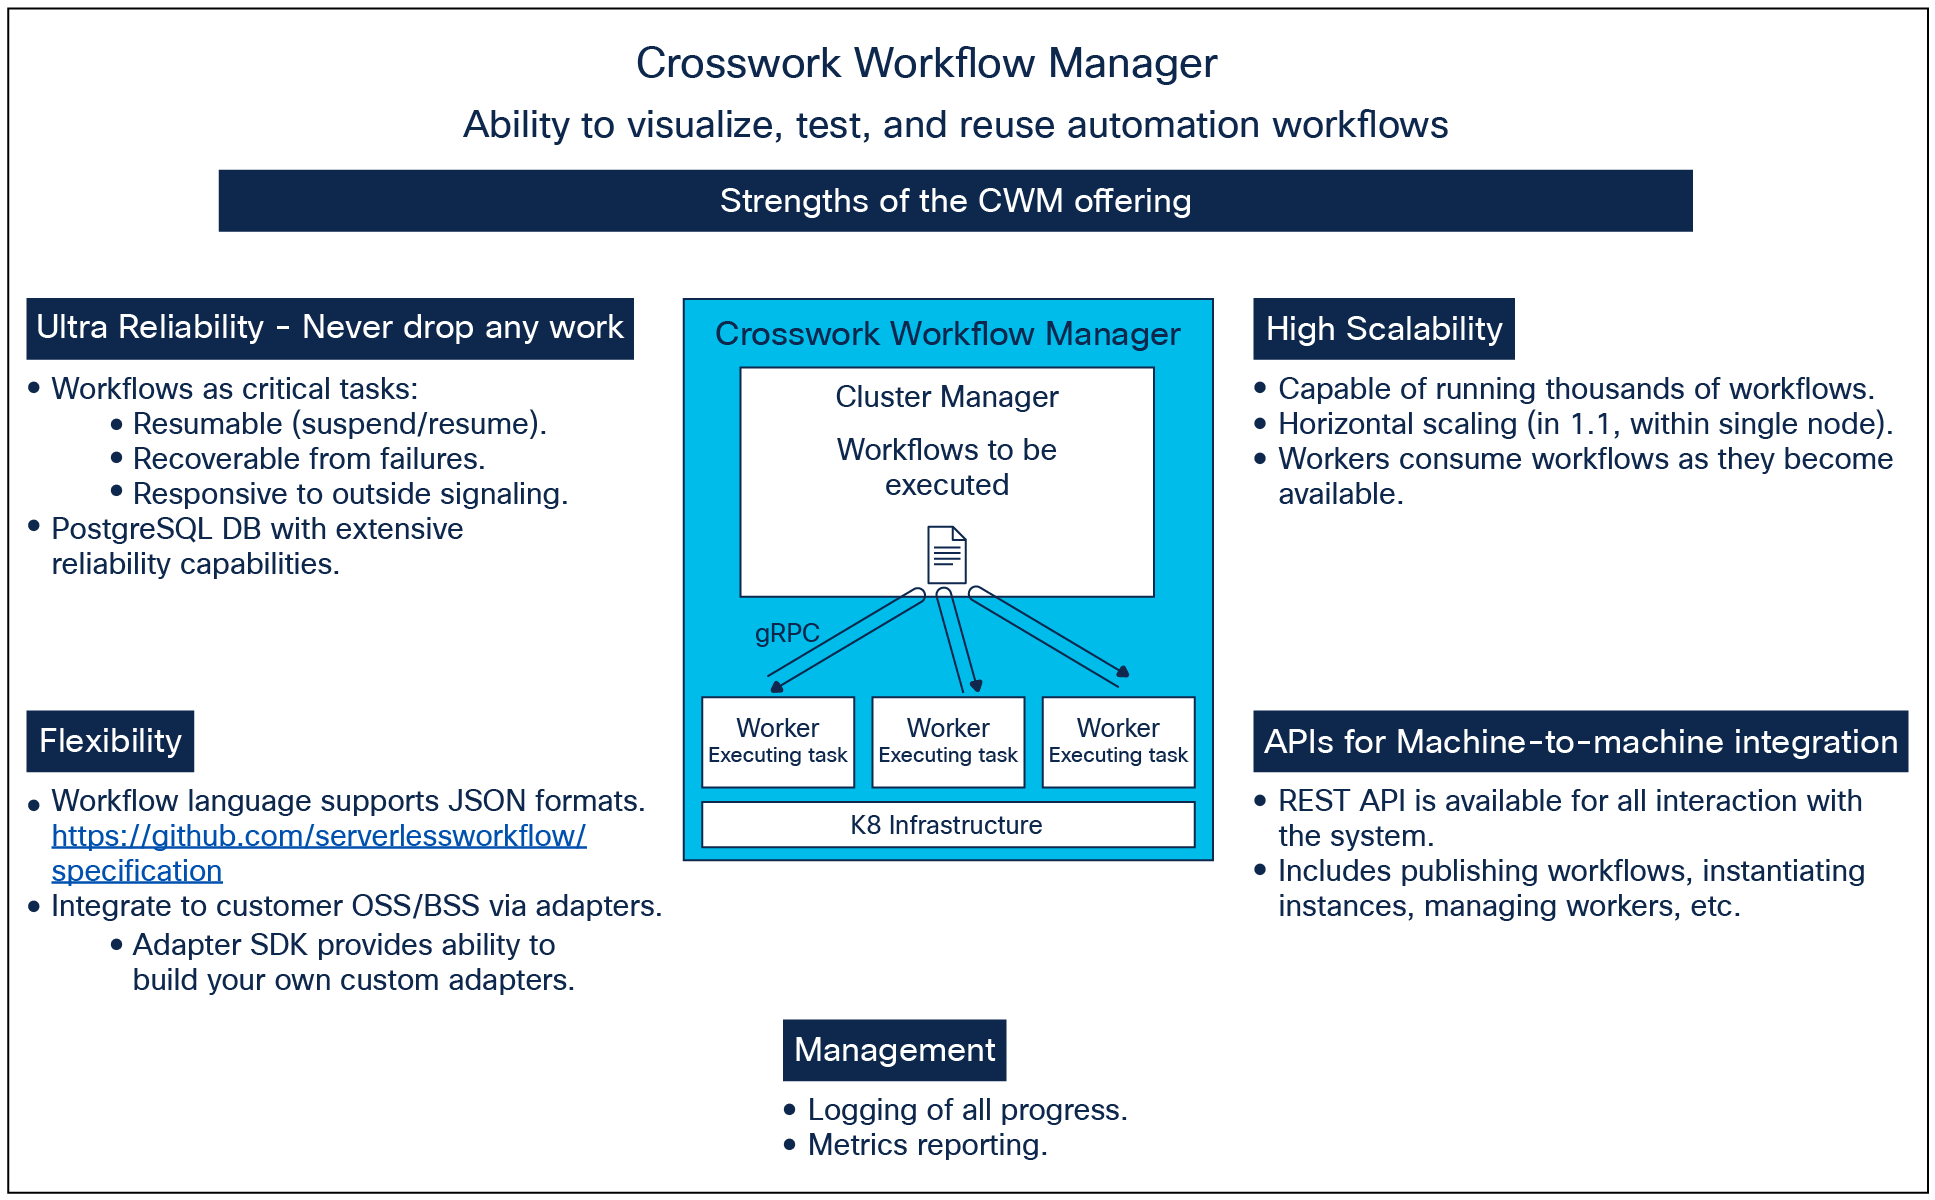 Crosswork Workflow Manager - at a glance